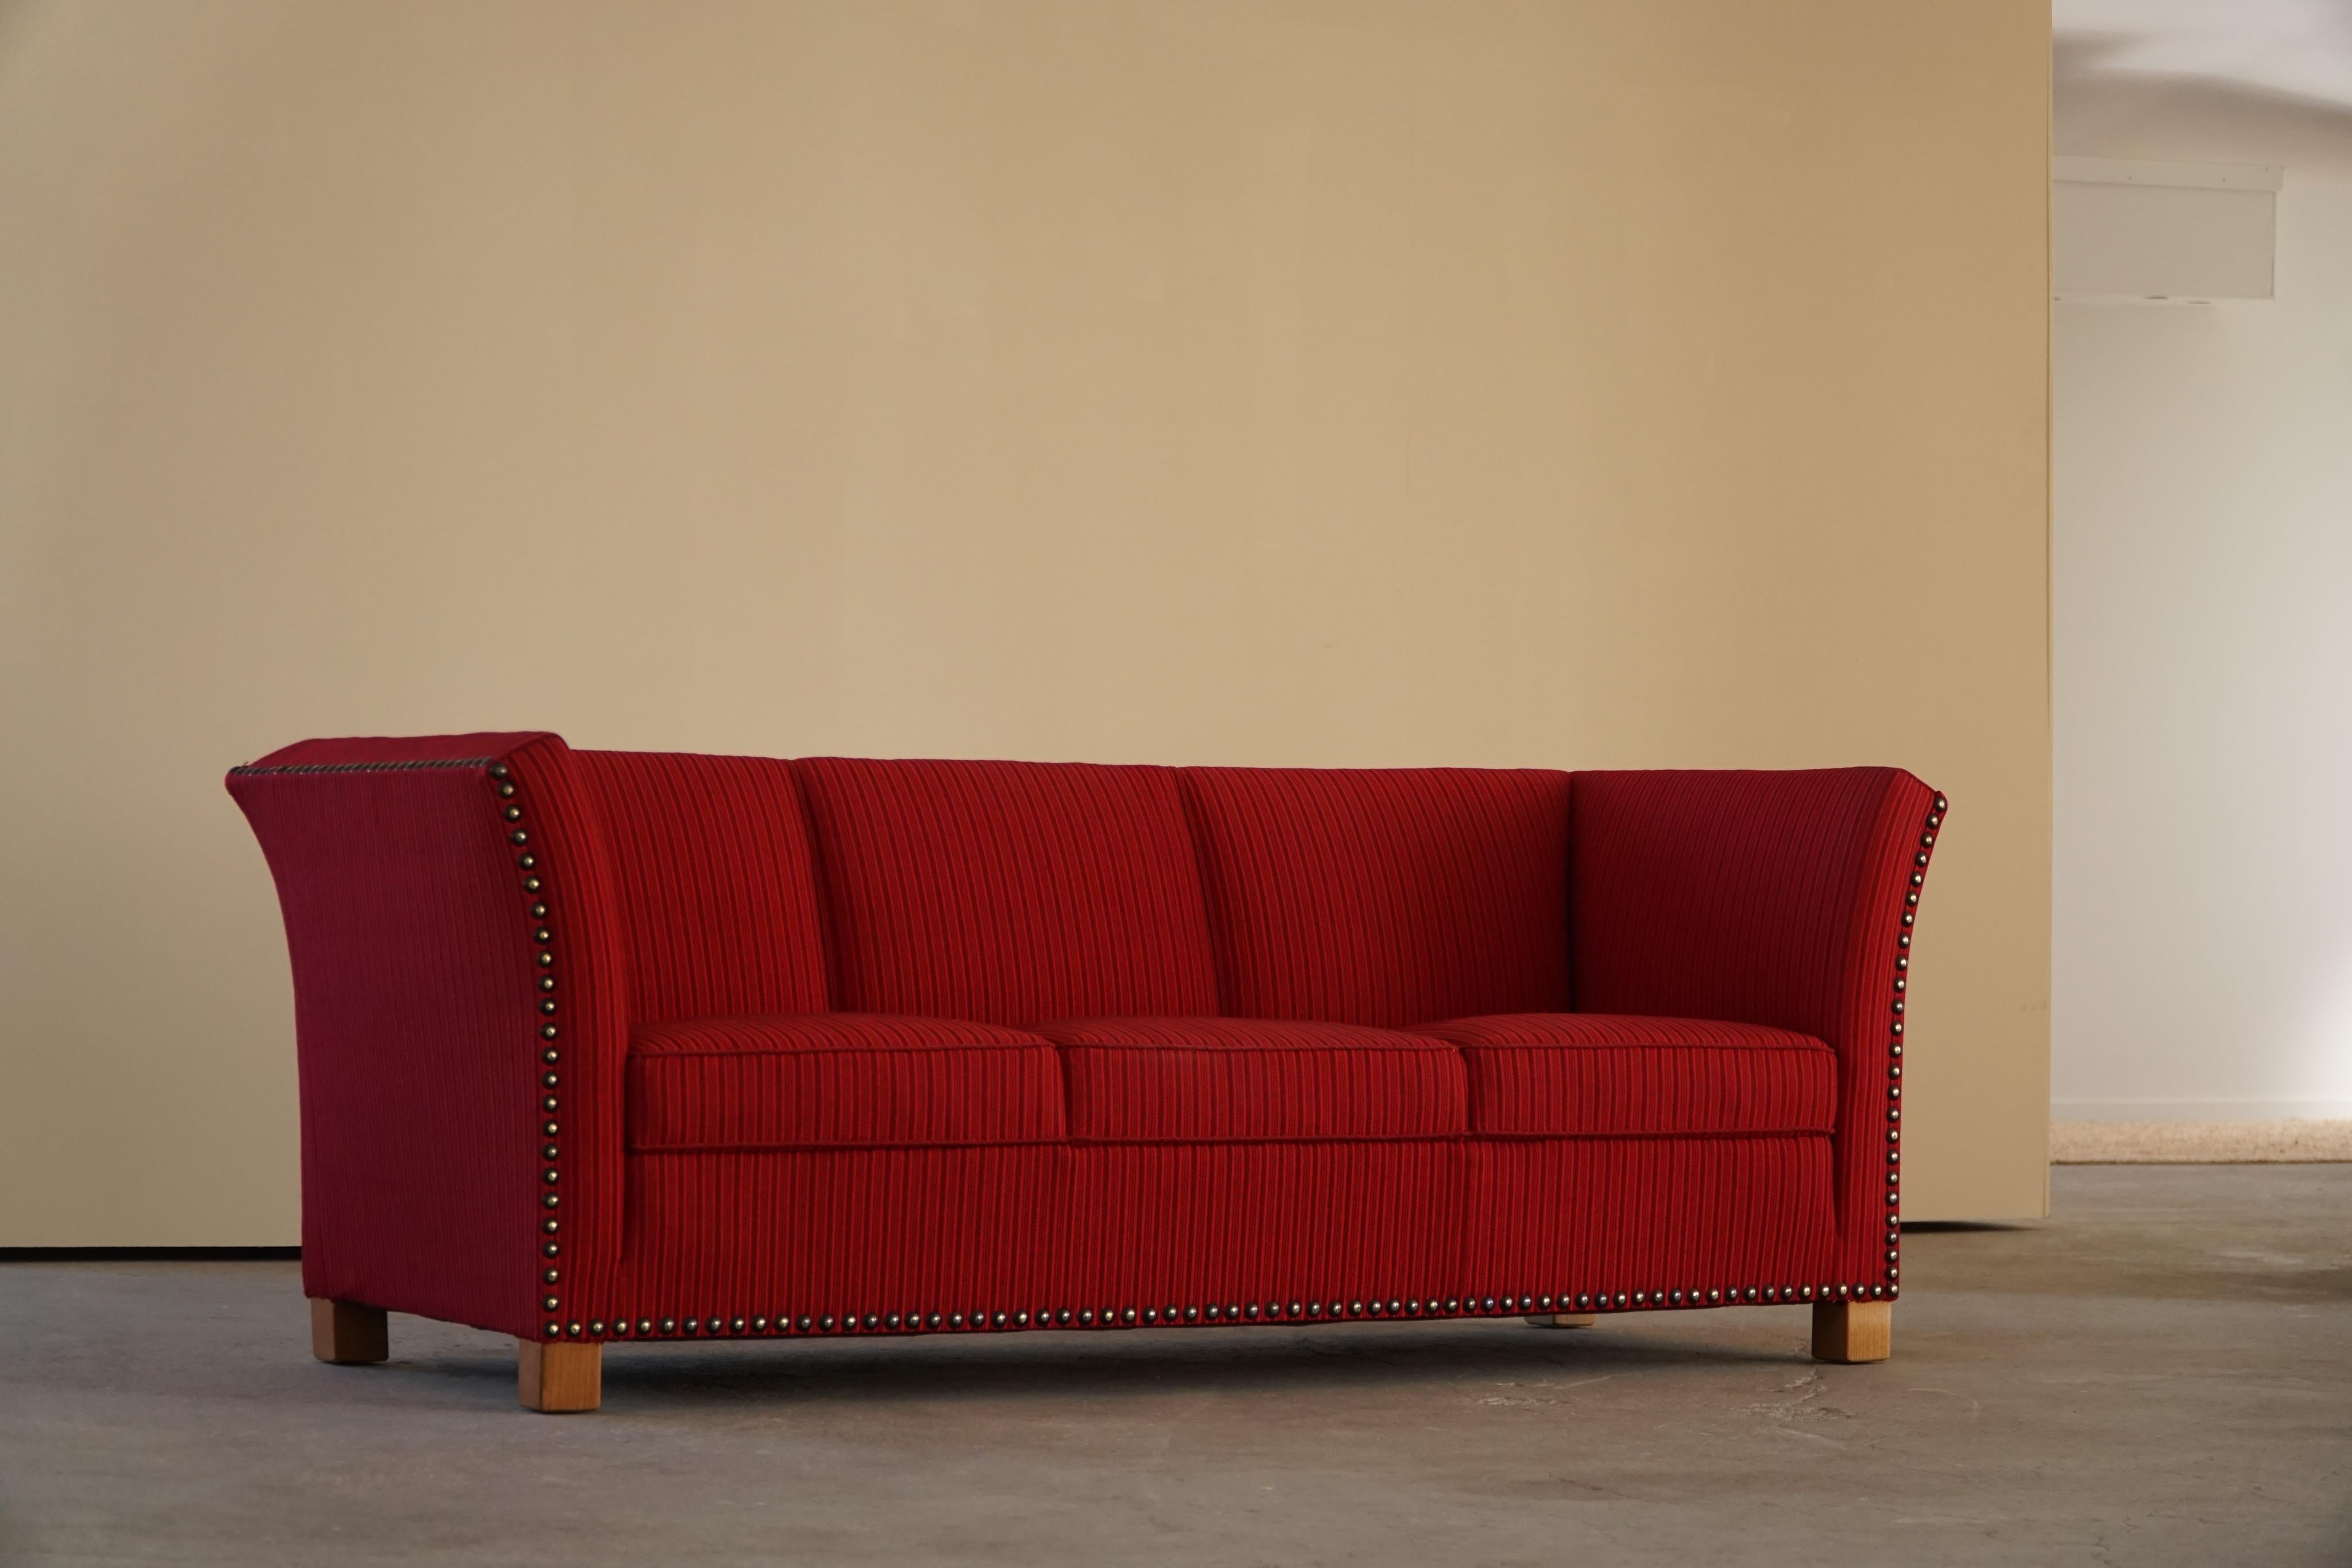 Art Deco 3-Seater Sofa By A Danish Cabinetmaker, Flemming Lassen Style, 1940s For Sale 4